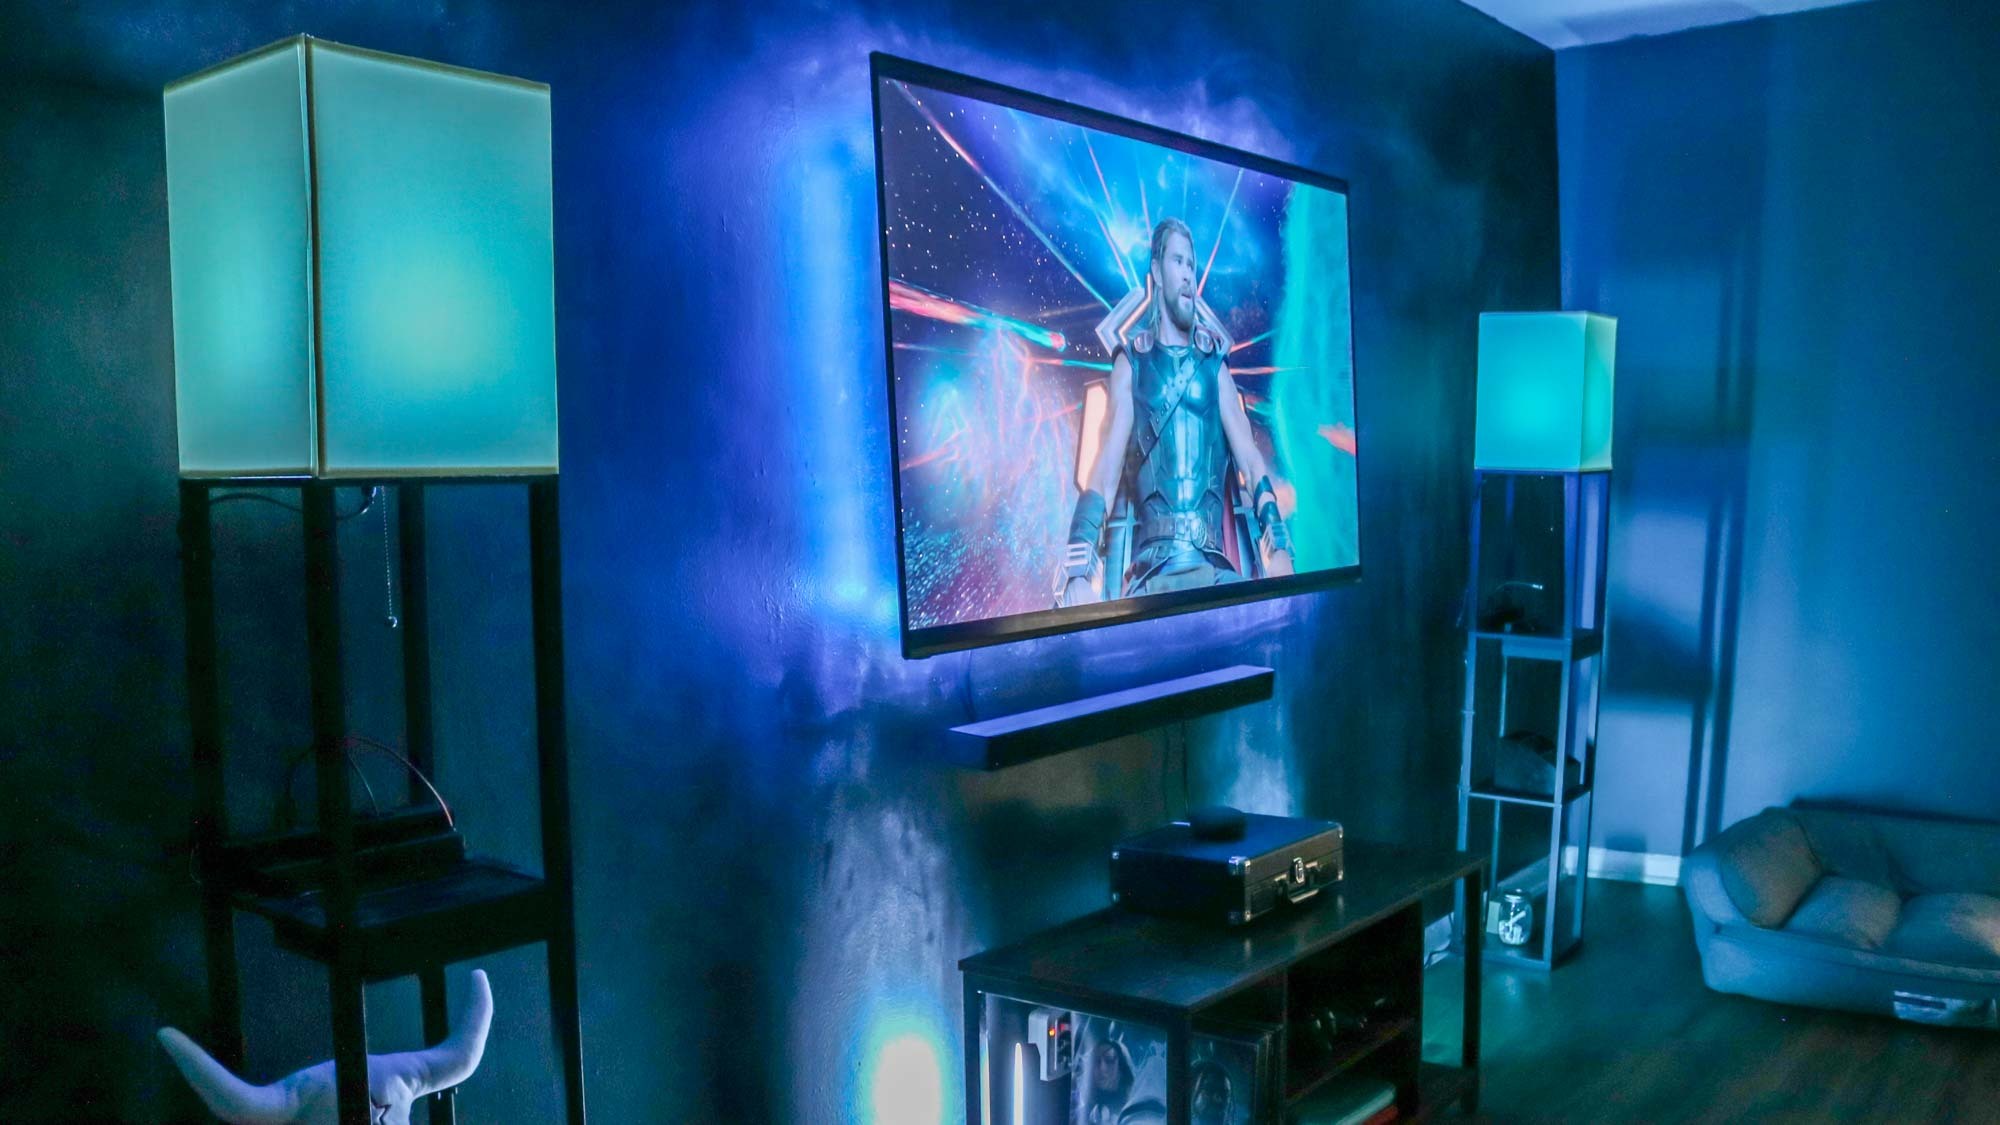 I synced my smart lights with my TV — and it blew my mind